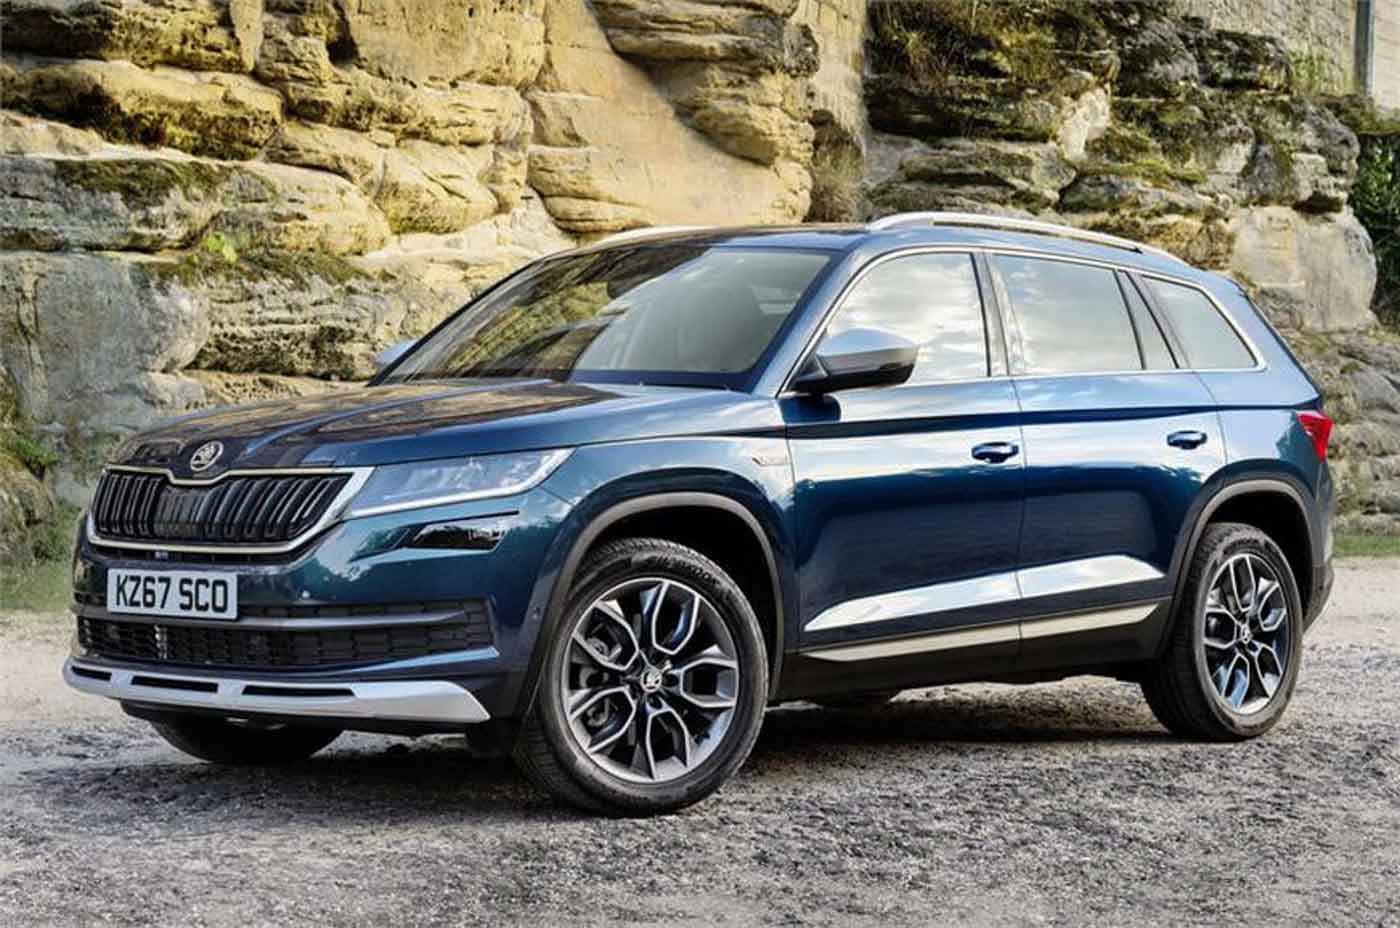 Considering Engines For Kodiaq & Bigger Models In India